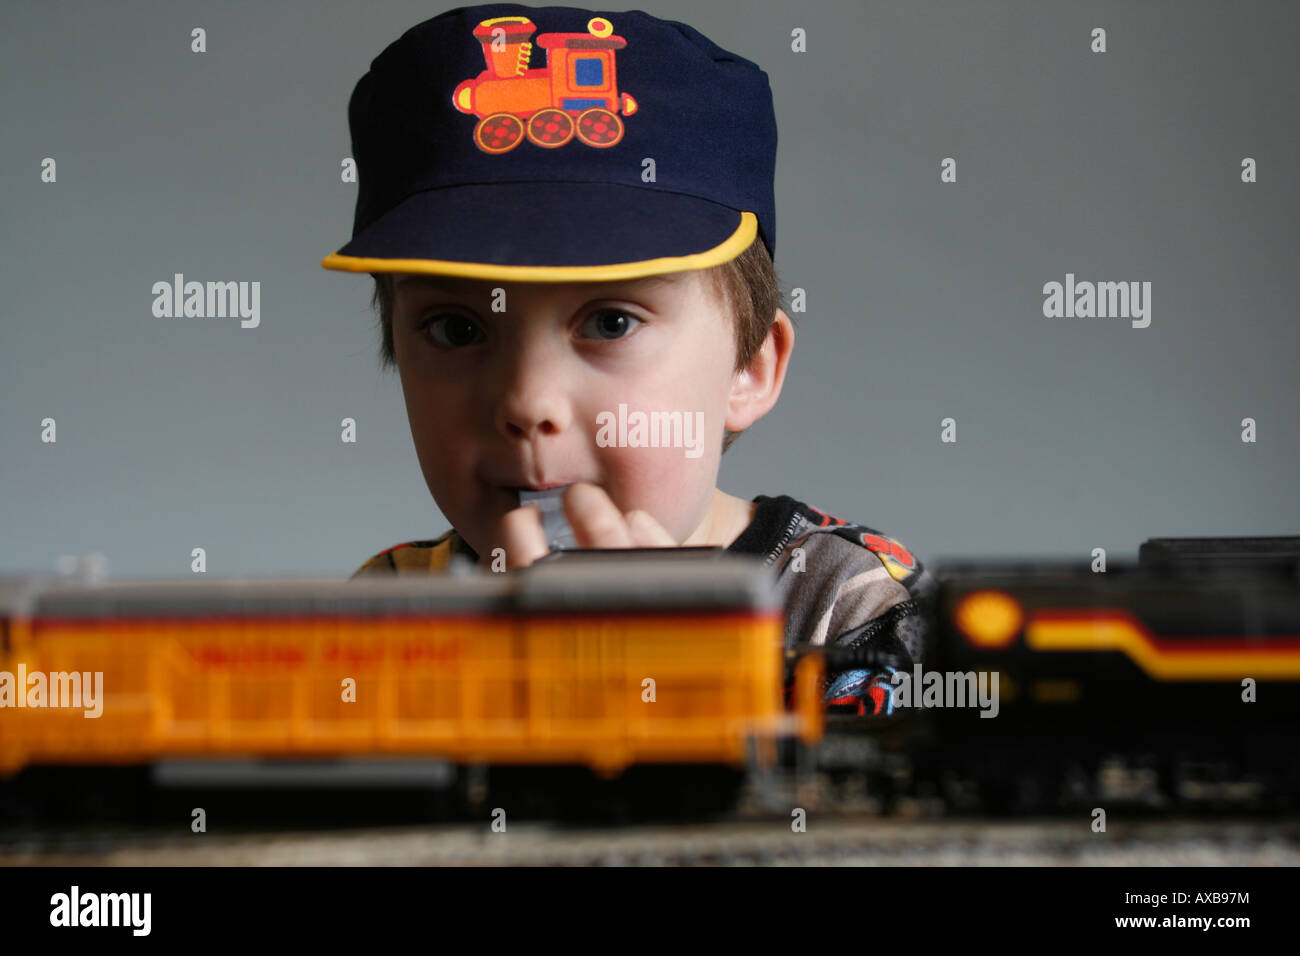 Lewis aged six and his Hornby electric trainset. 00 H0 rolling stock track, Union Pacific train 824, Model train set with track, hat and whistle form part of the game Stock Photo